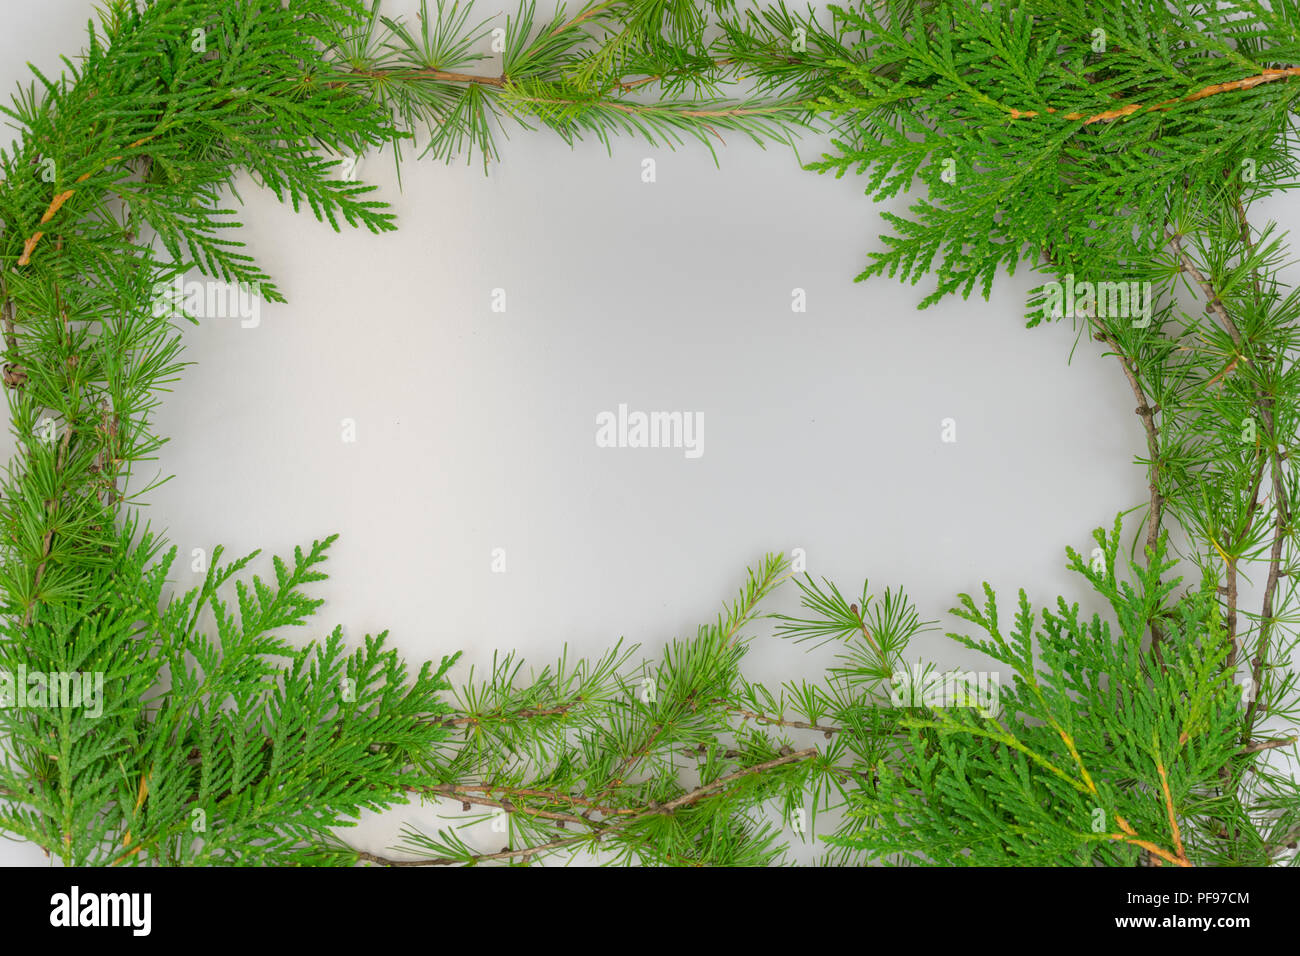 a border of cedar and tamarack branches with copy space in the middle for your message Stock Photo